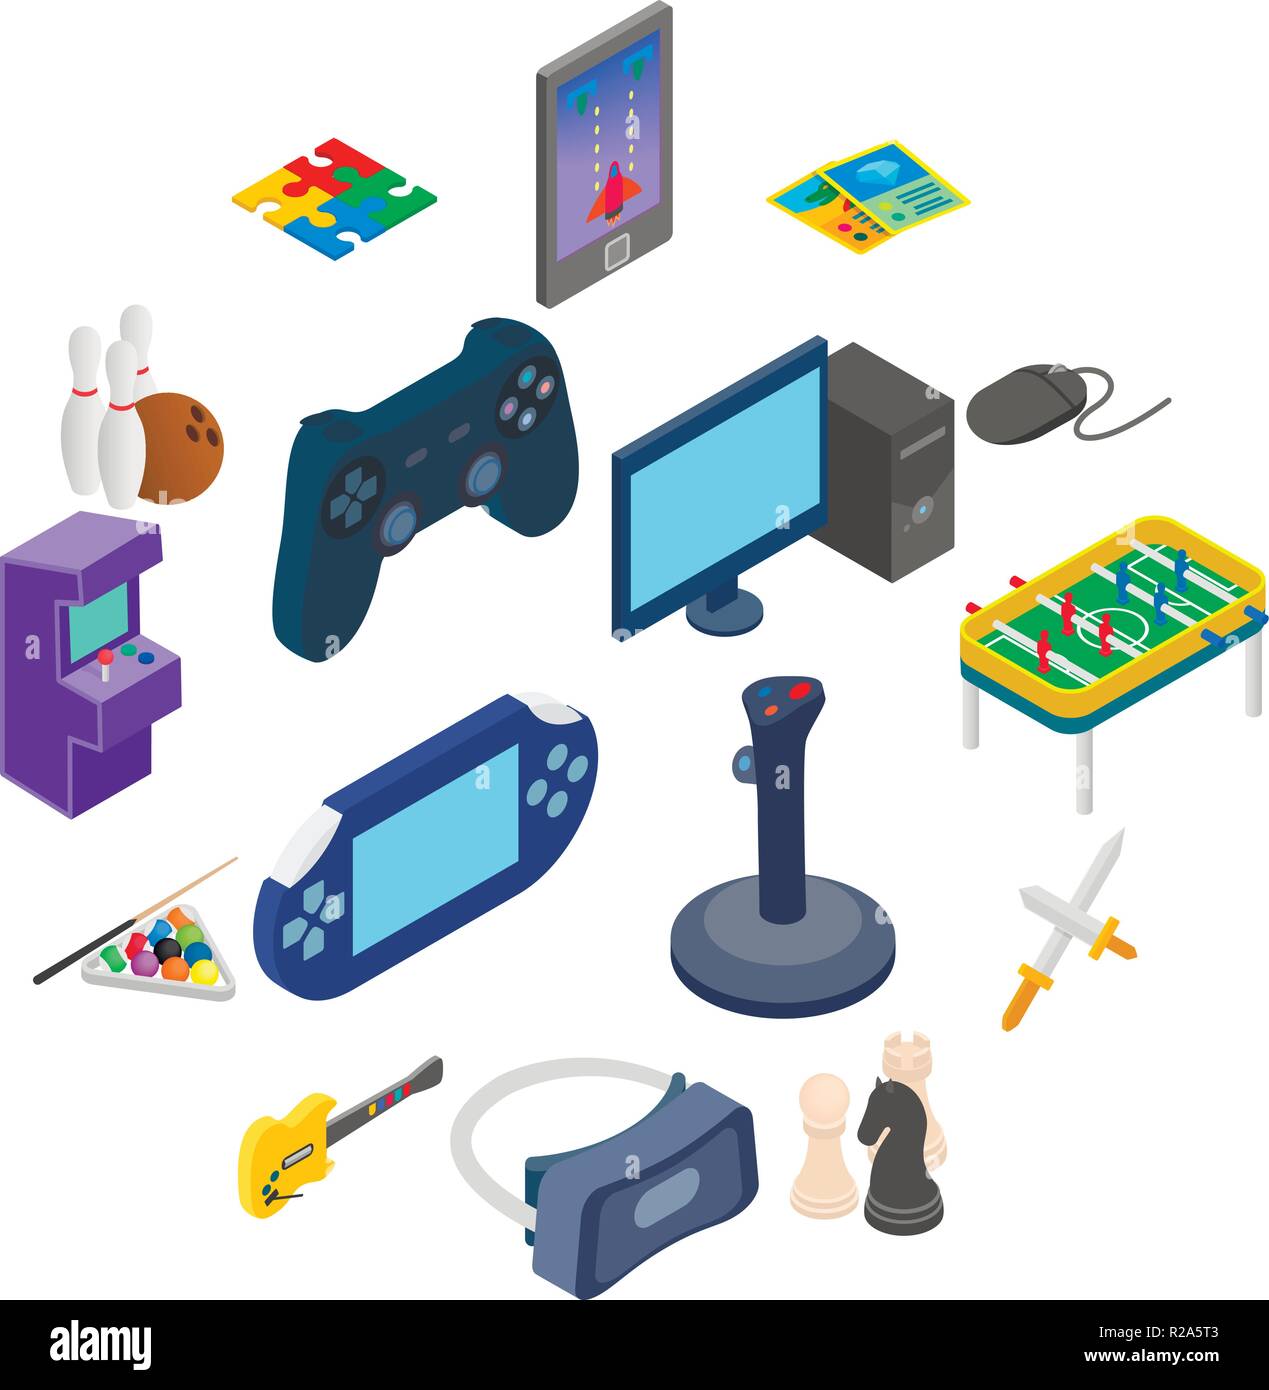 Games icons set in isometric 3d style isolated on white Stock Vector